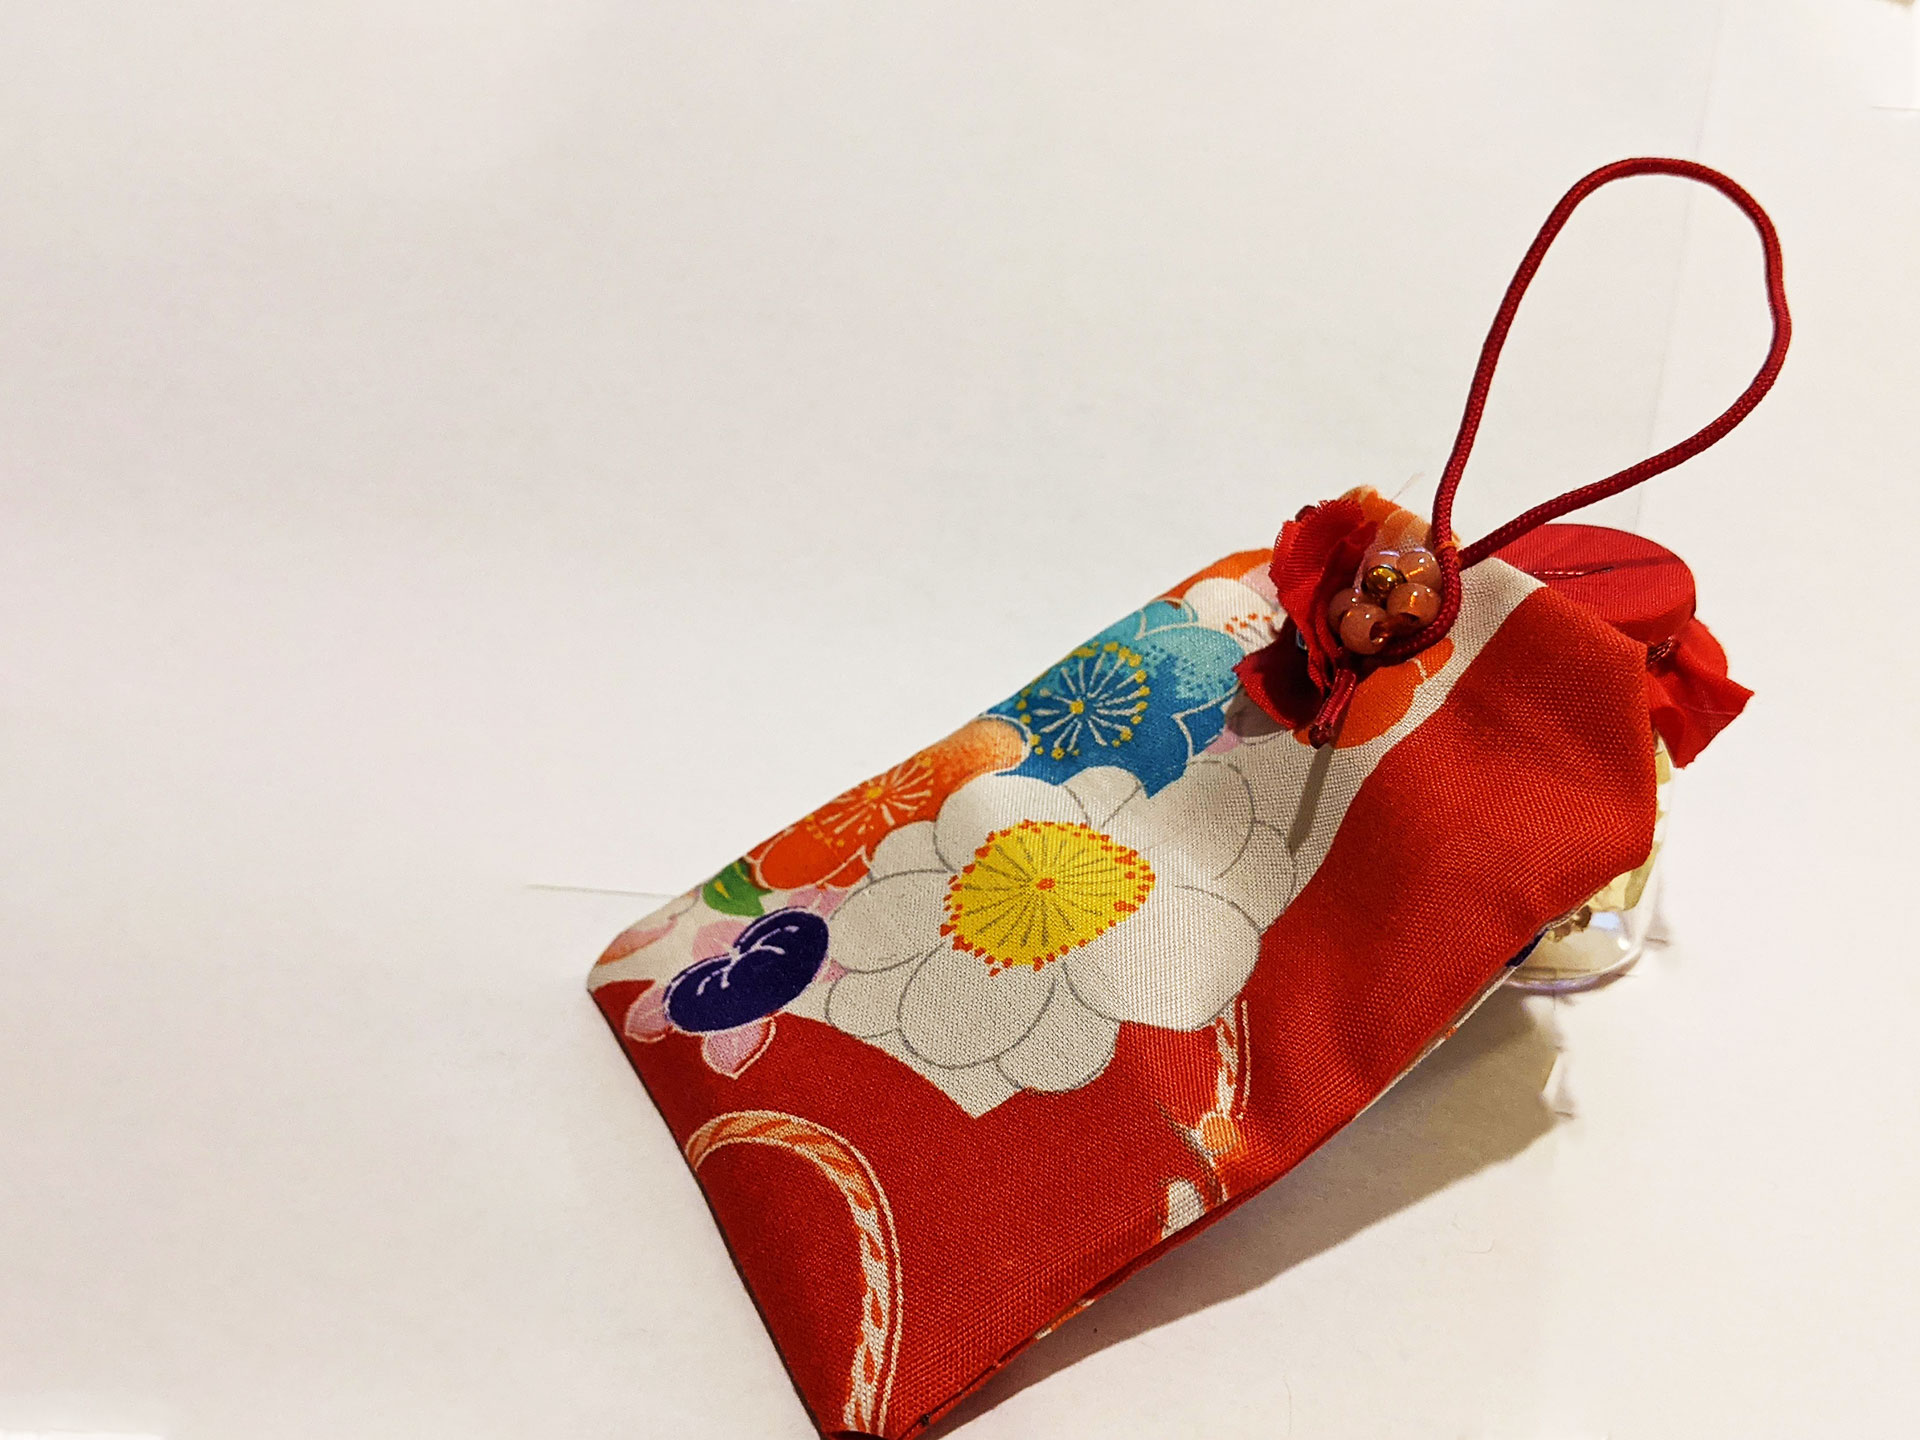 Japanese Omamori Amulet Charm by Fan Stanbrough